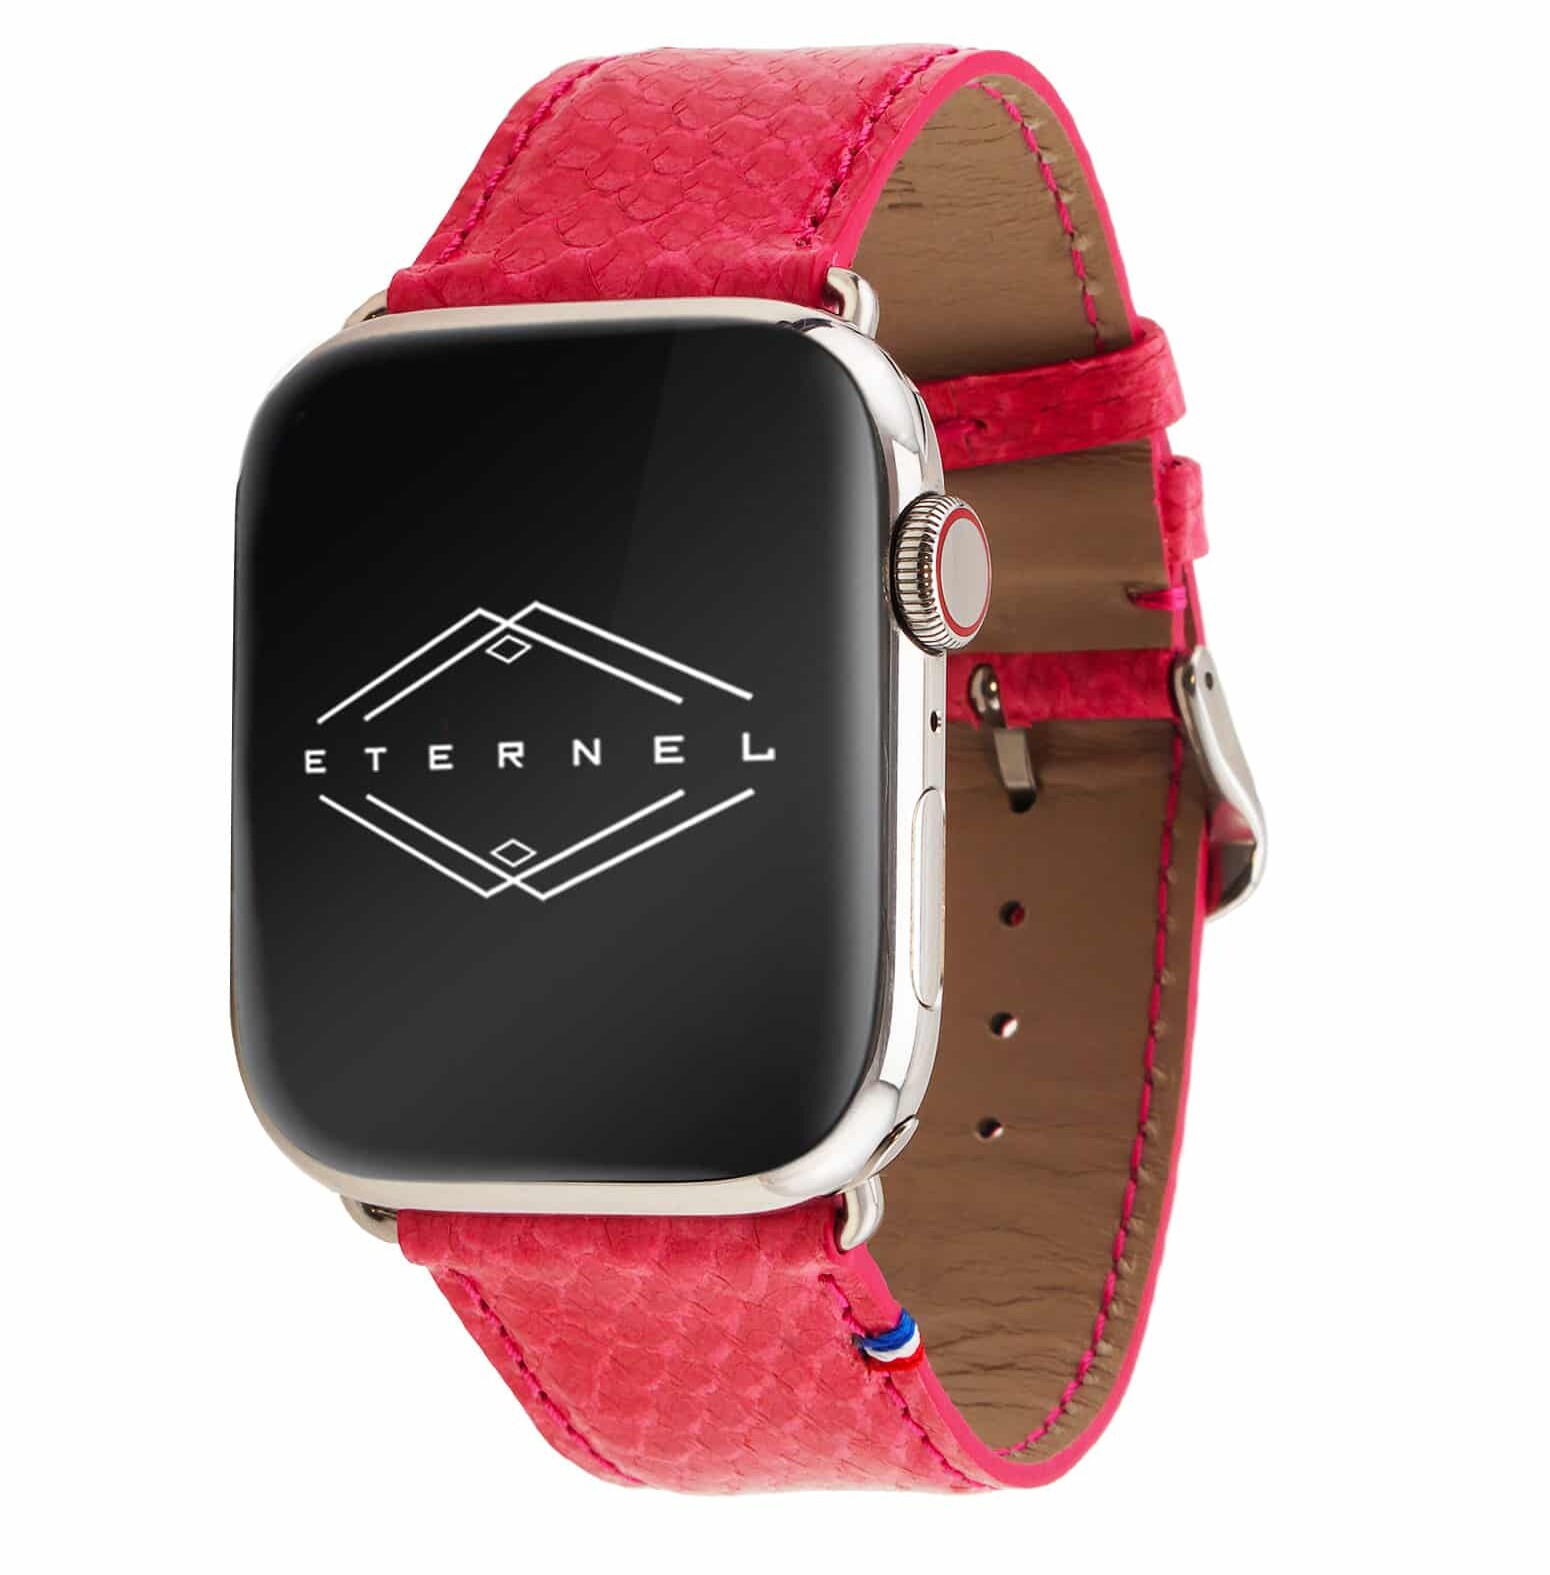 horizon eternel made in france ictyos bracelet apple watch cuir marin upcycling corail rouge